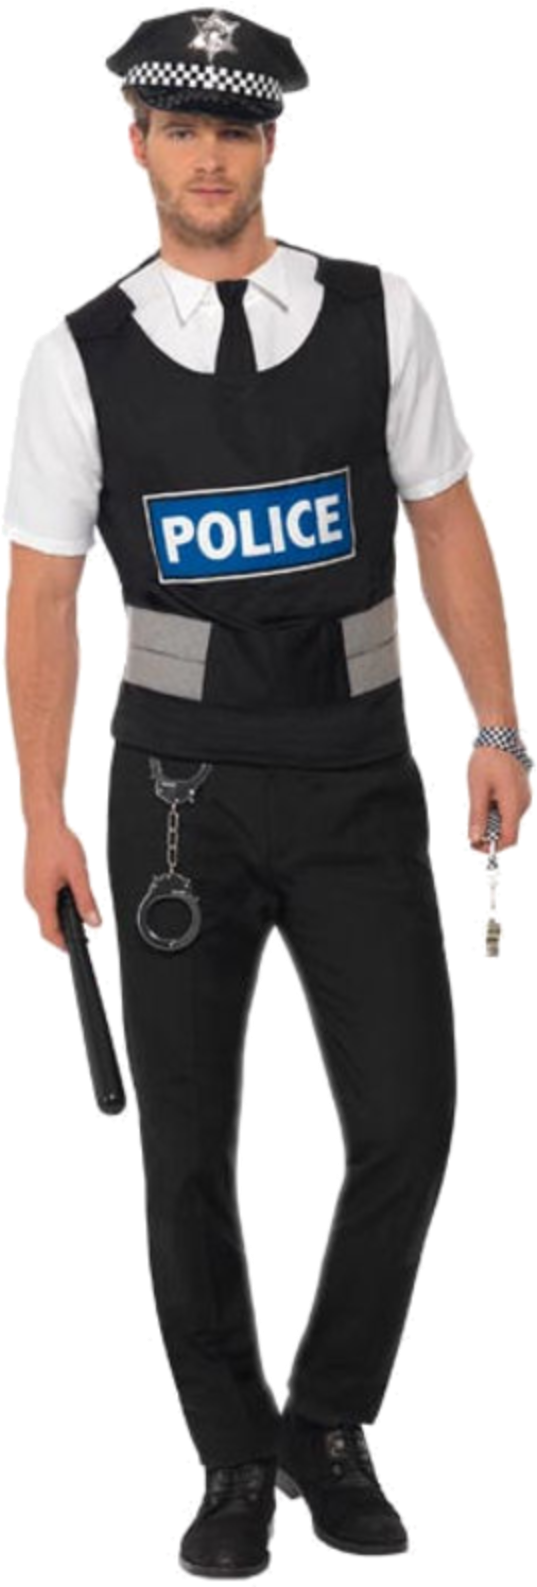 Policeman Instant Kit Costume - Cops And Robber Fancy Dress (1000x1586)